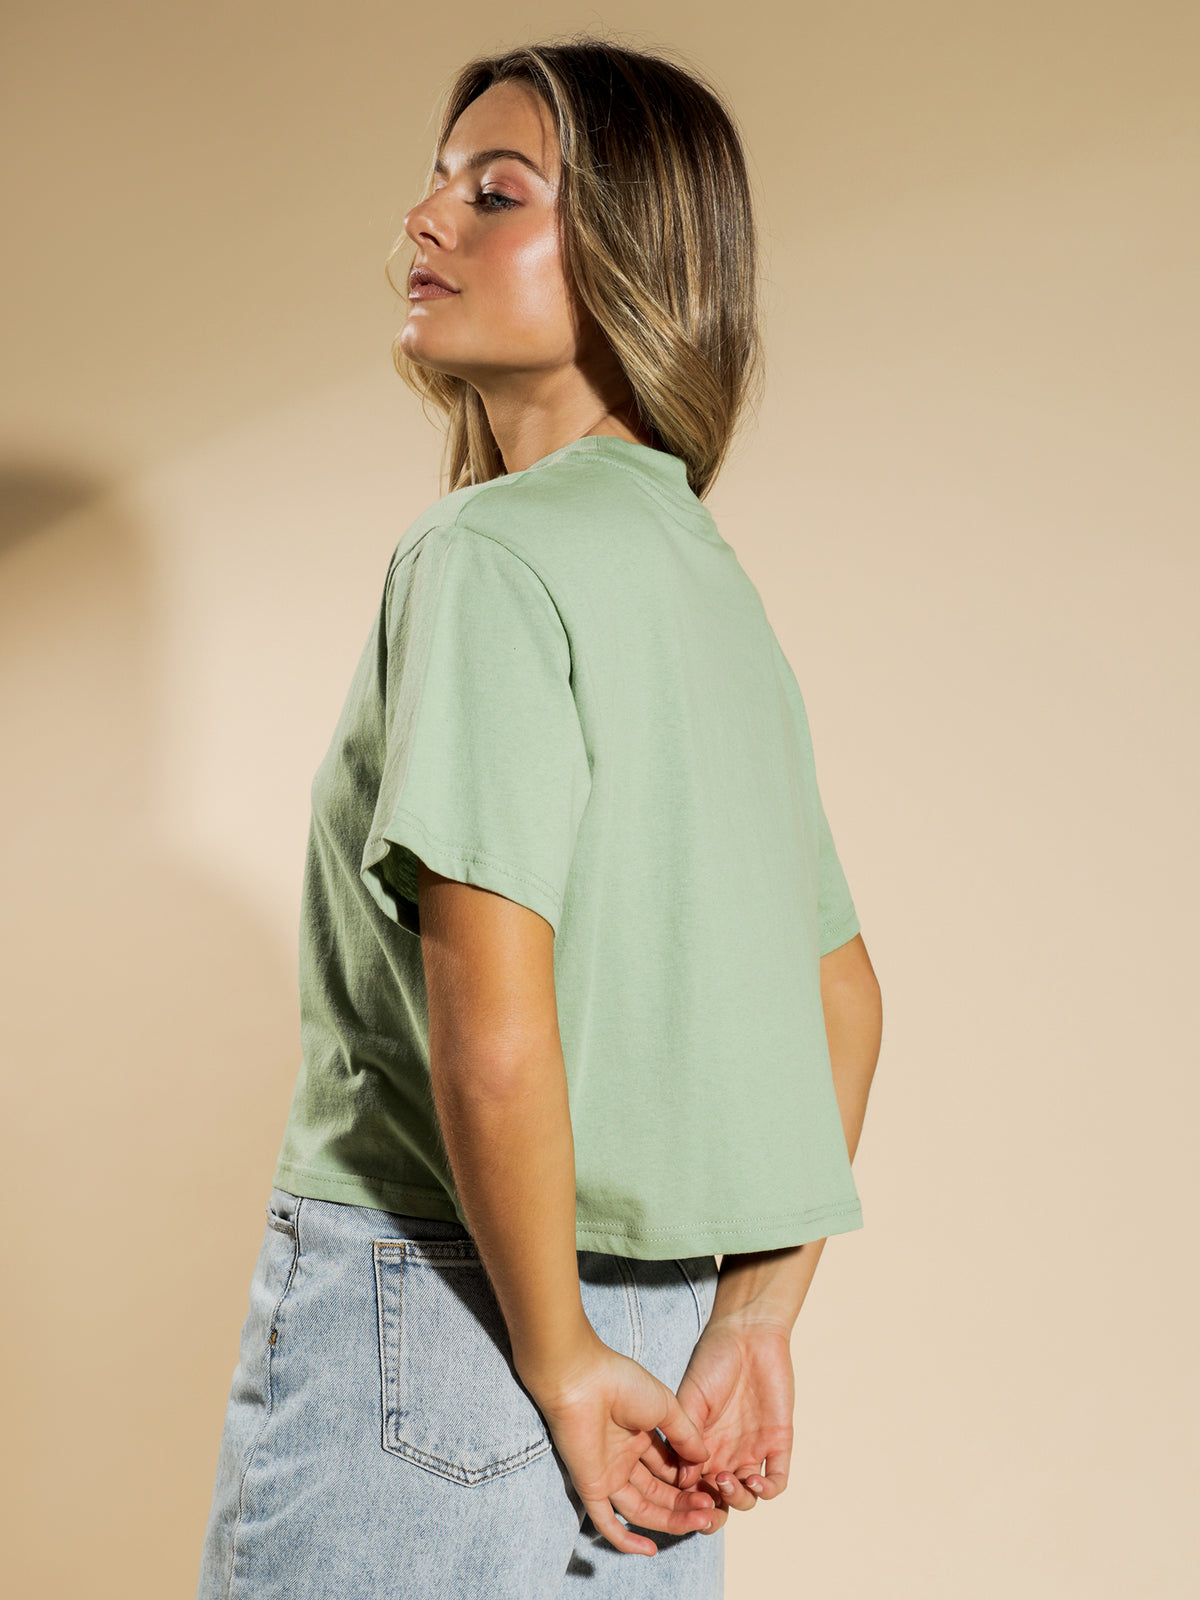 Copyright Boxy Cropped T-Shirt in Basil